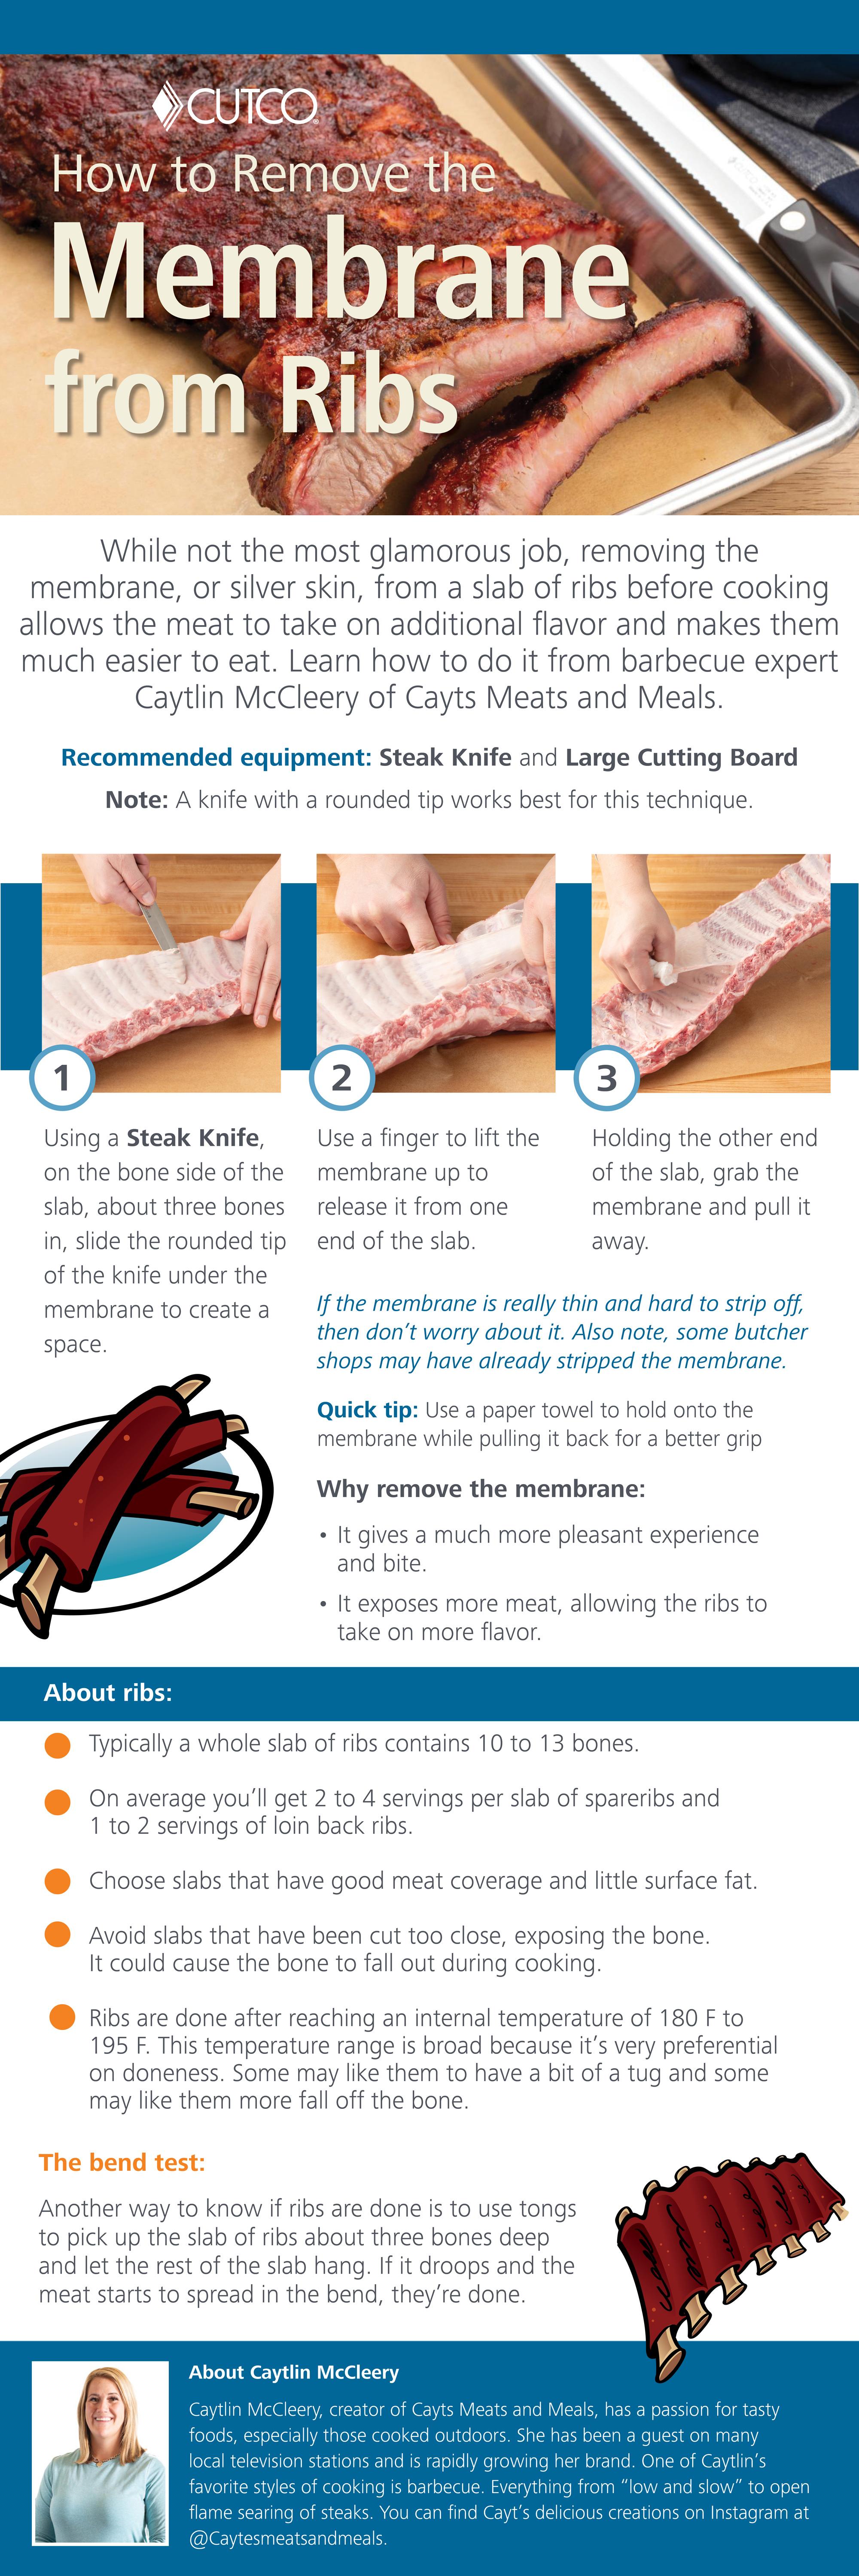 Removing the membrane from ribs infographic.